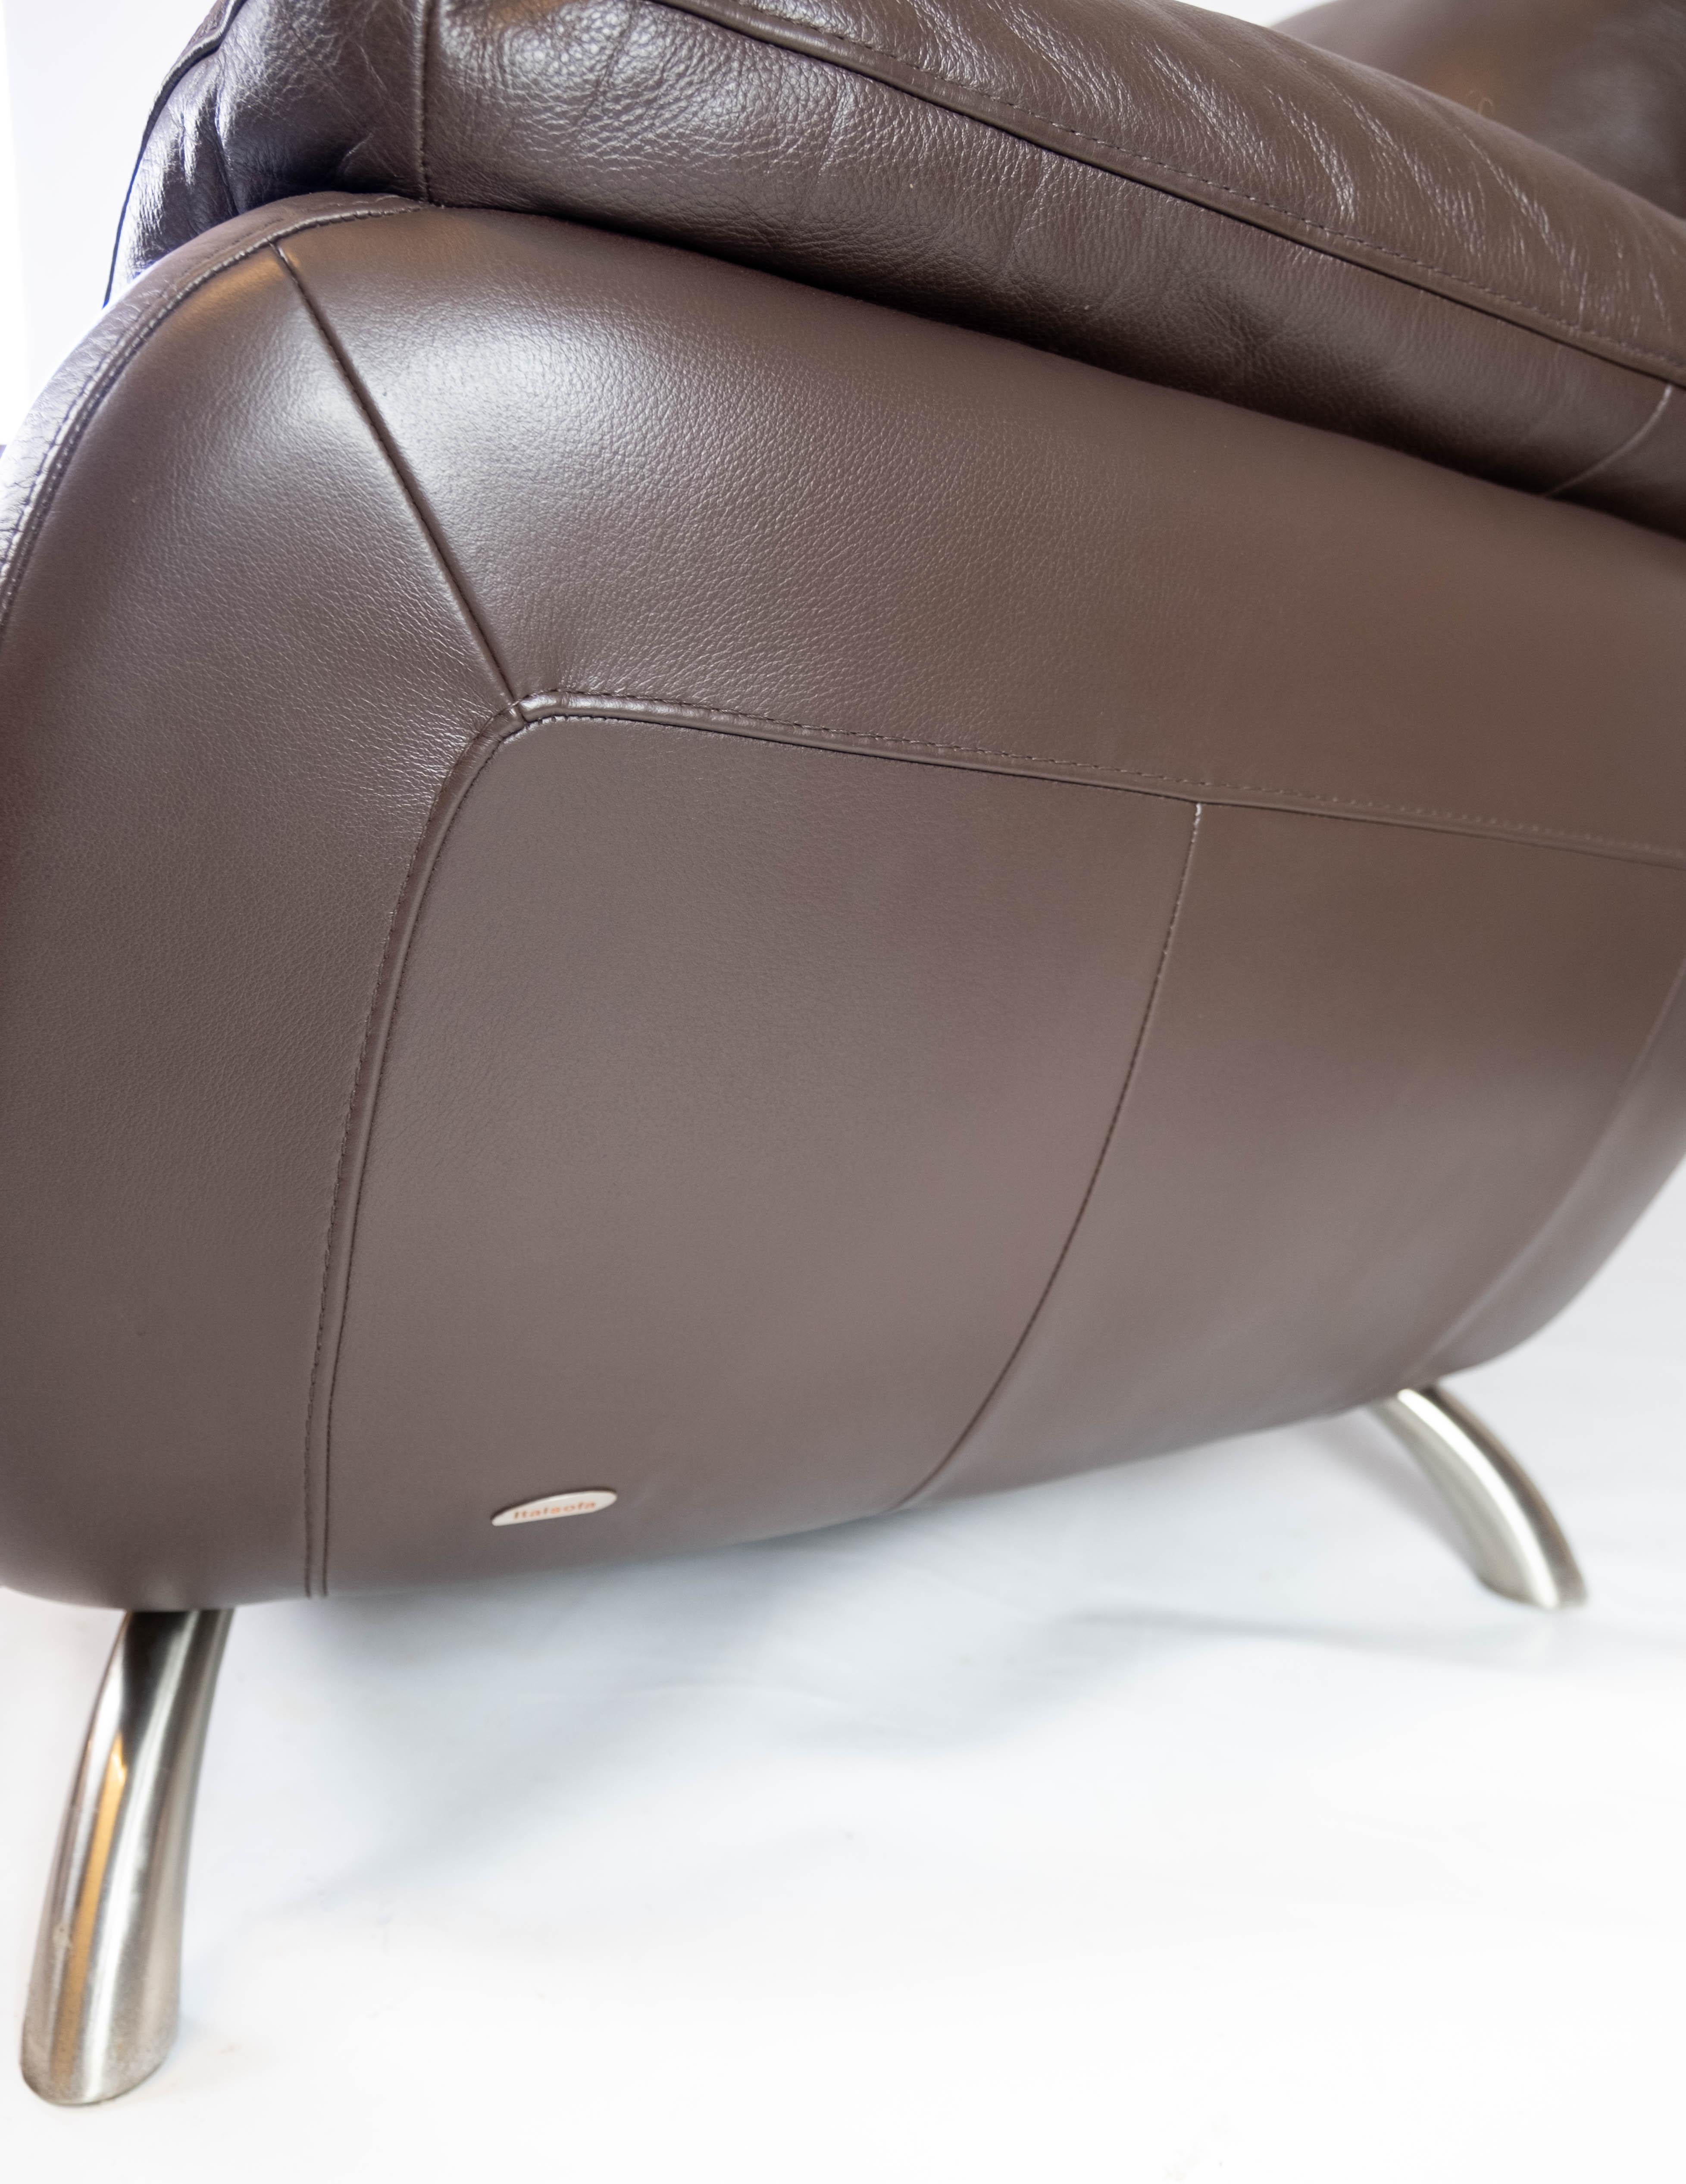 Grand canapé 2. Seater Sofa Made In Brown Leather By Italsofa  en vente 4